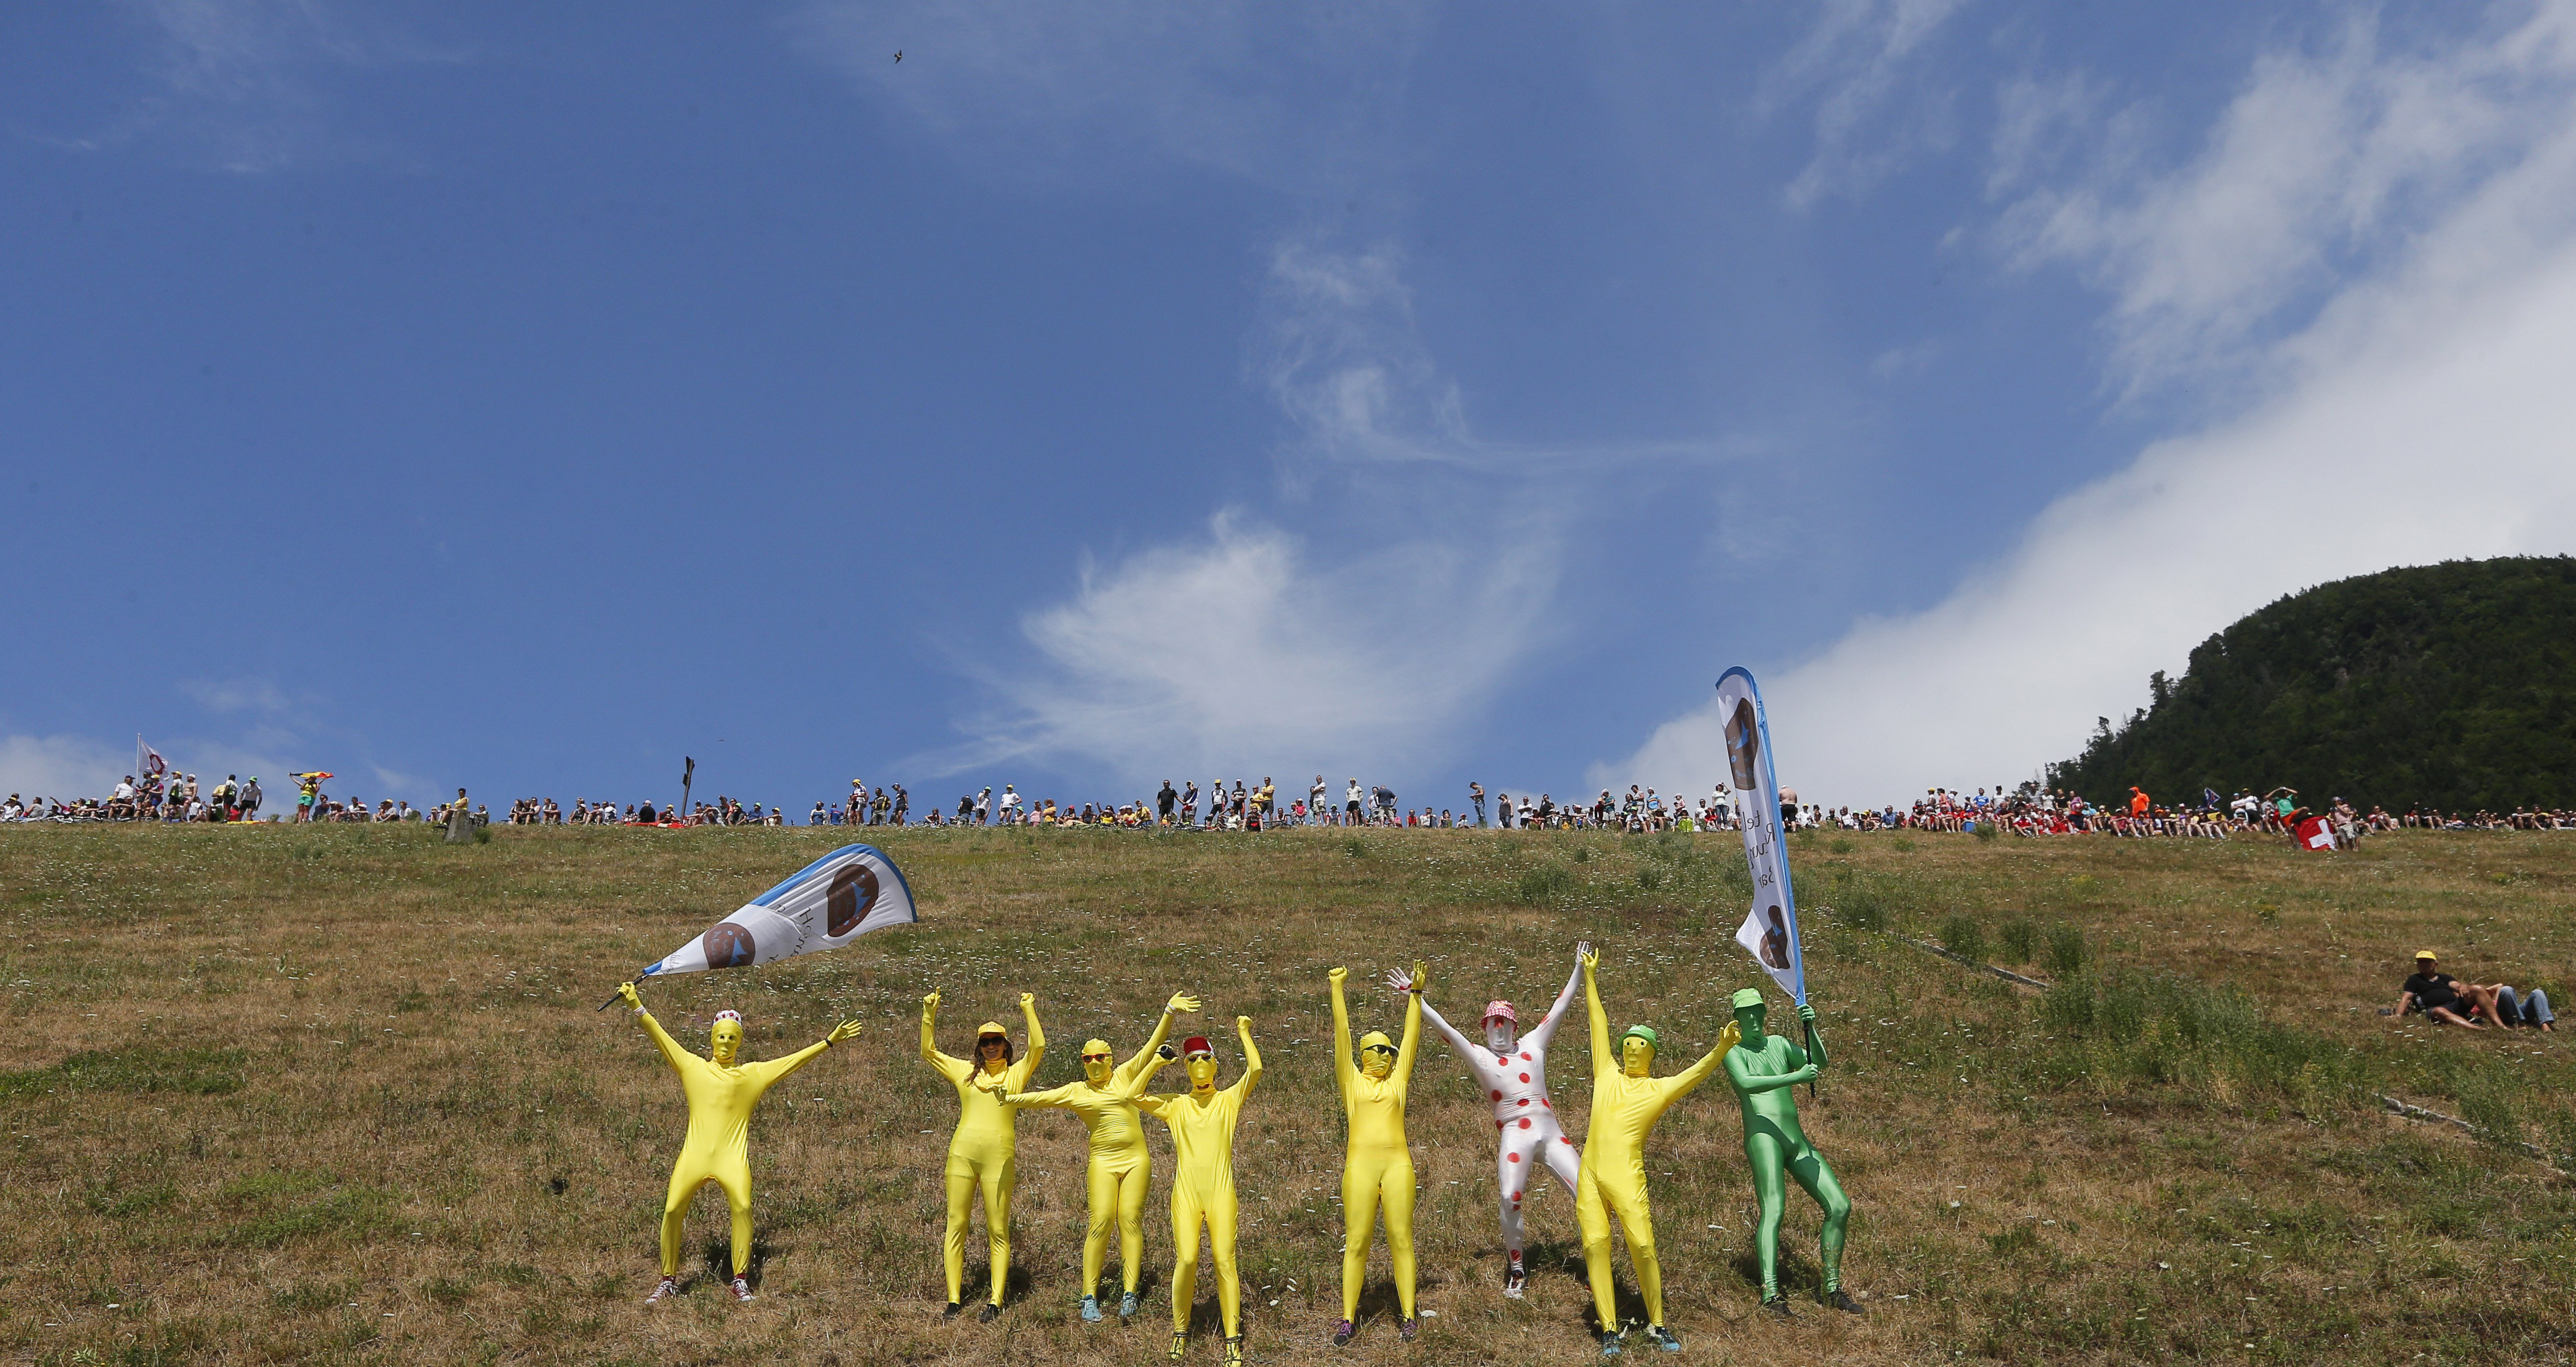 Disguised spectators cheer as riders pass during the 18th stage of the race ending in Saint-Jean-de-Maurienne, France on July 23, 2015.